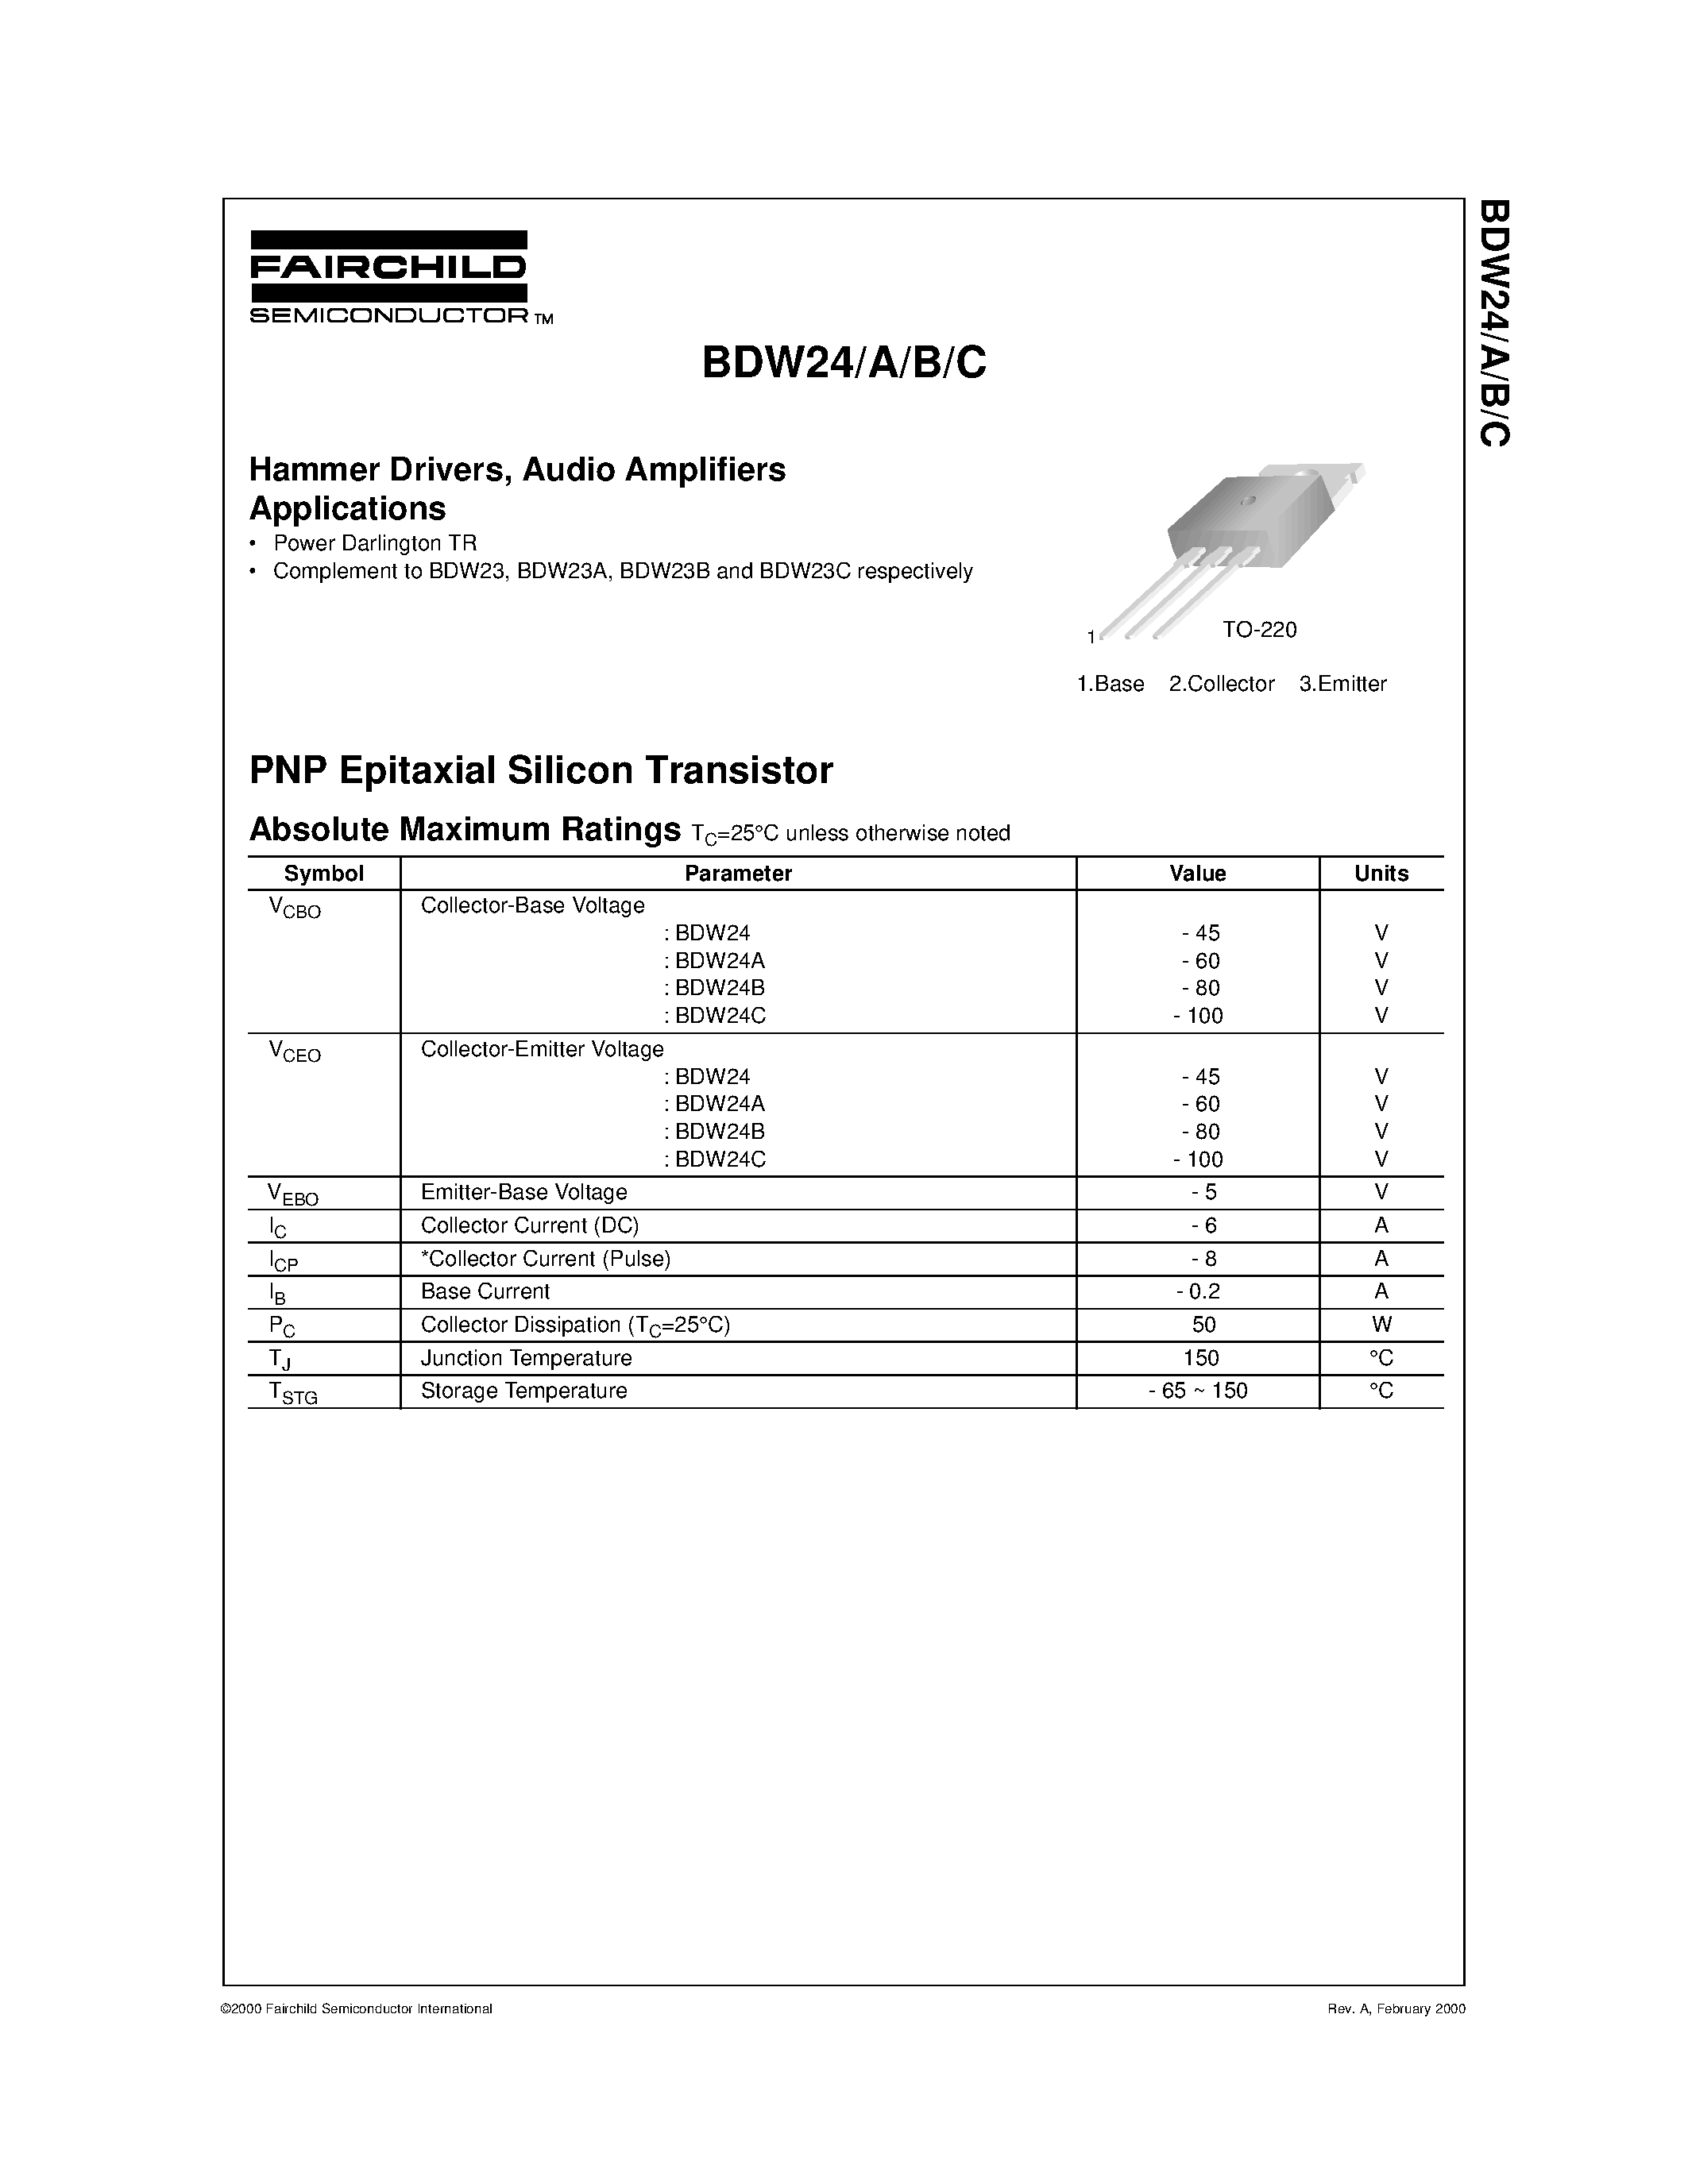 Datasheet BDW24c - Hammer Drivers/ Audio Amplifiers Applications page 1